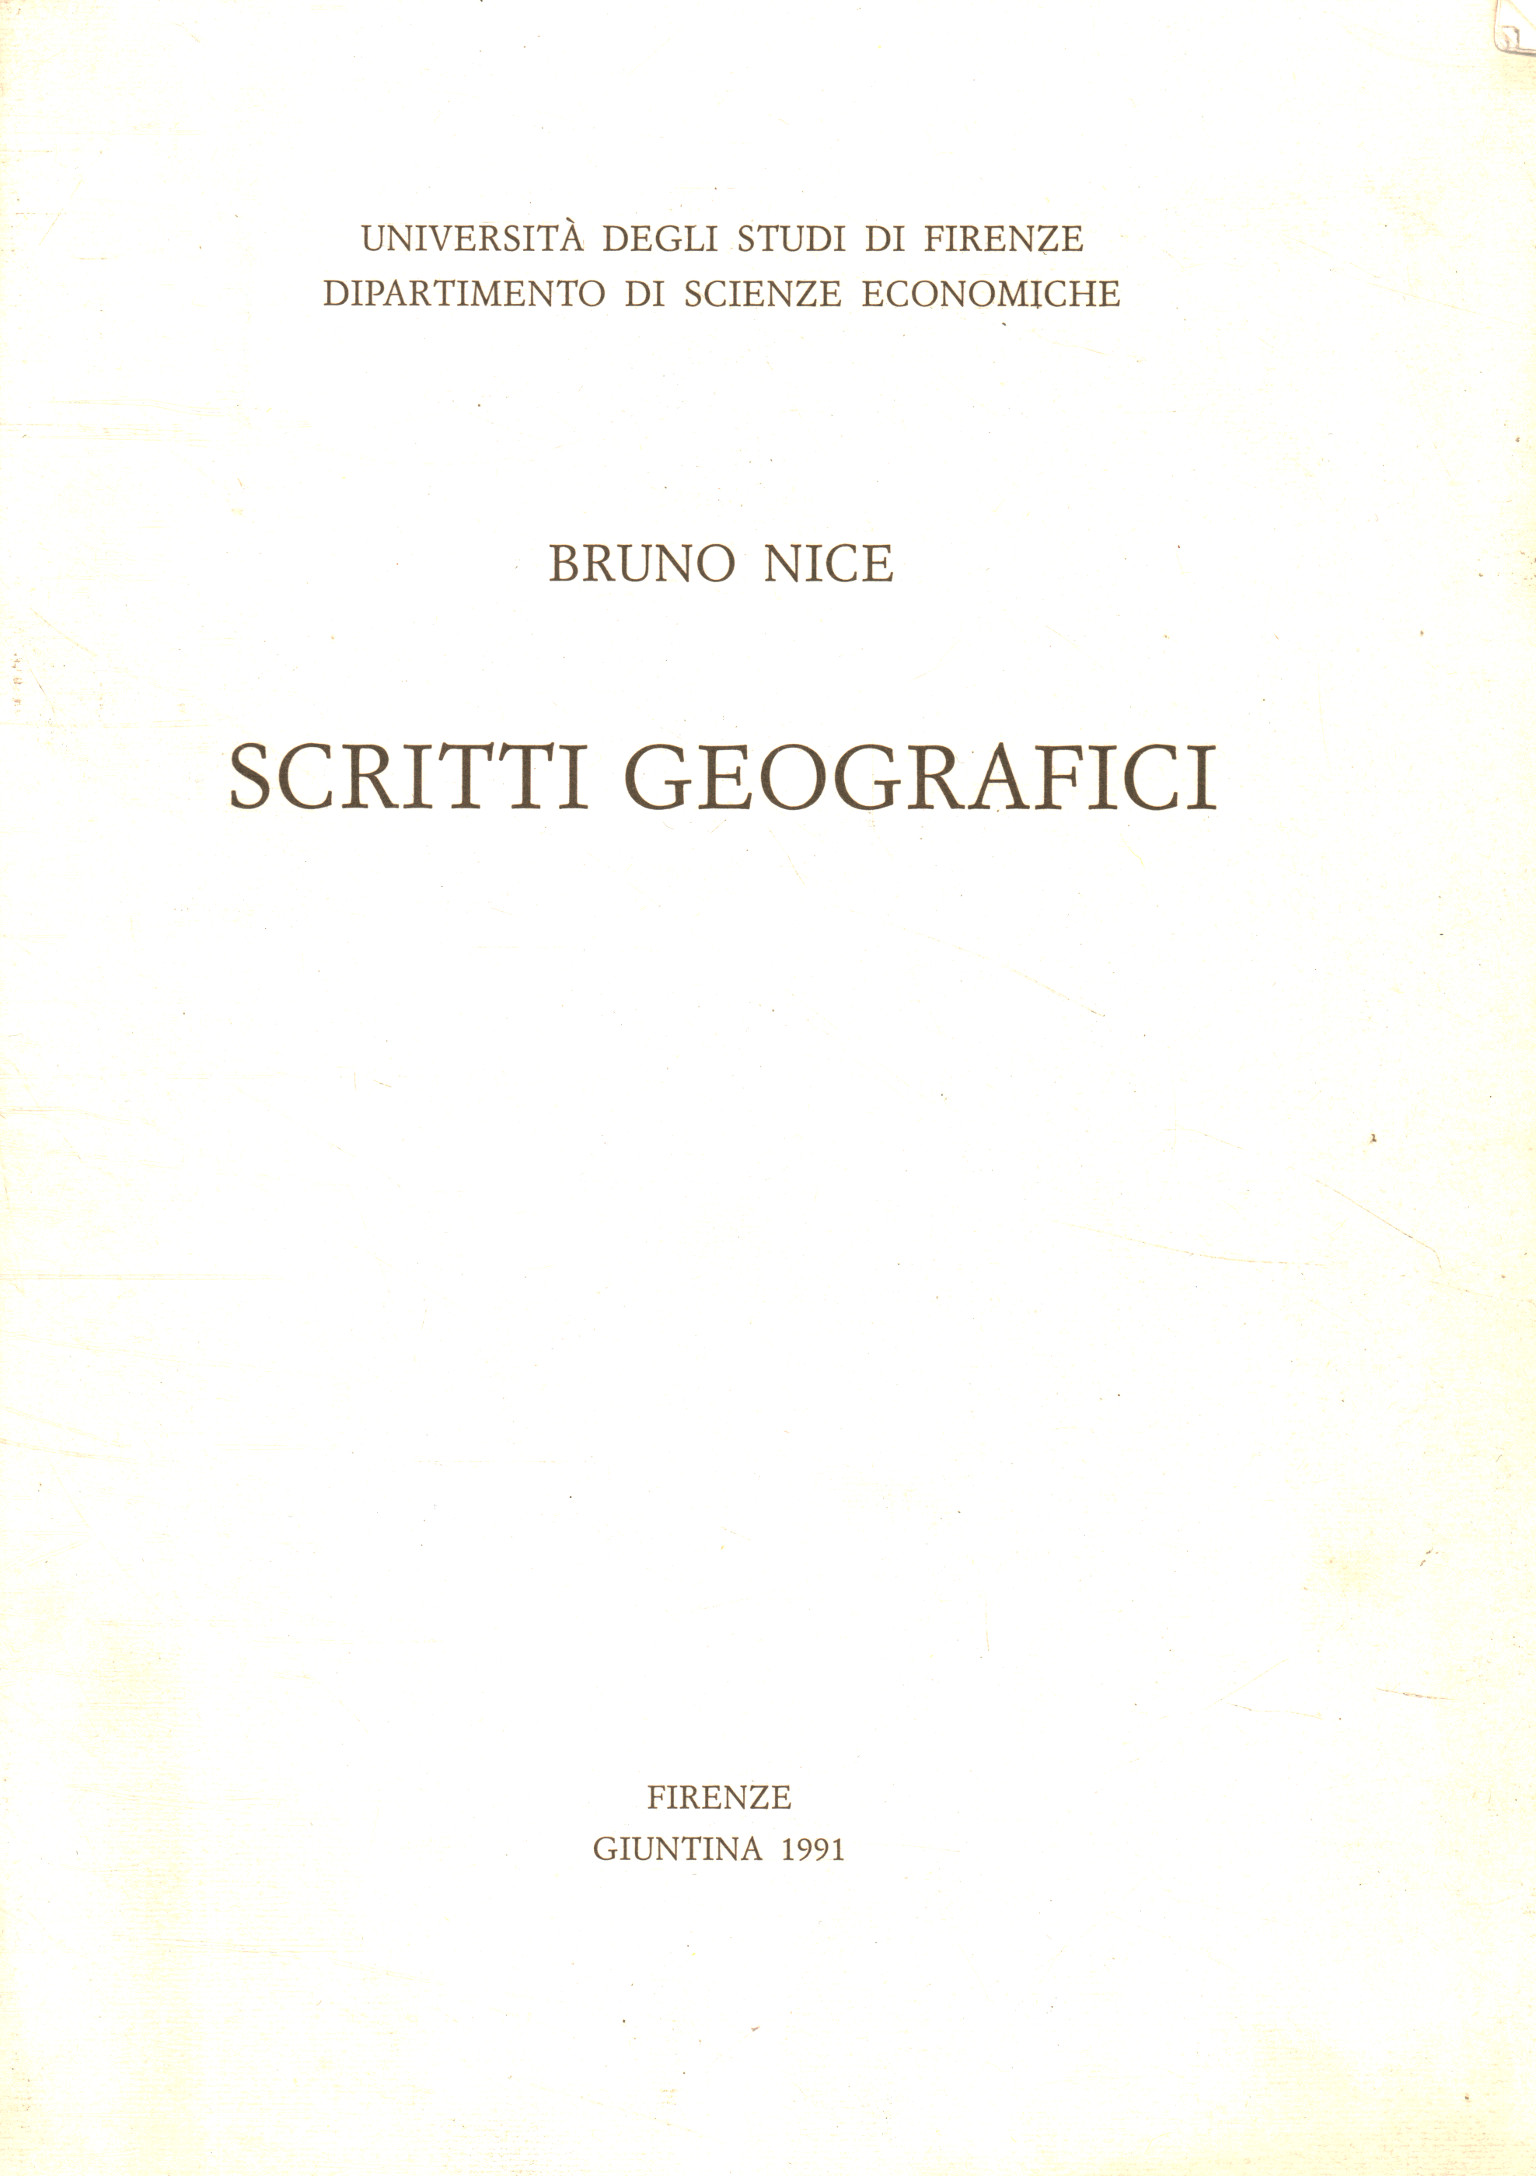 Geographical writings (1939-1991)